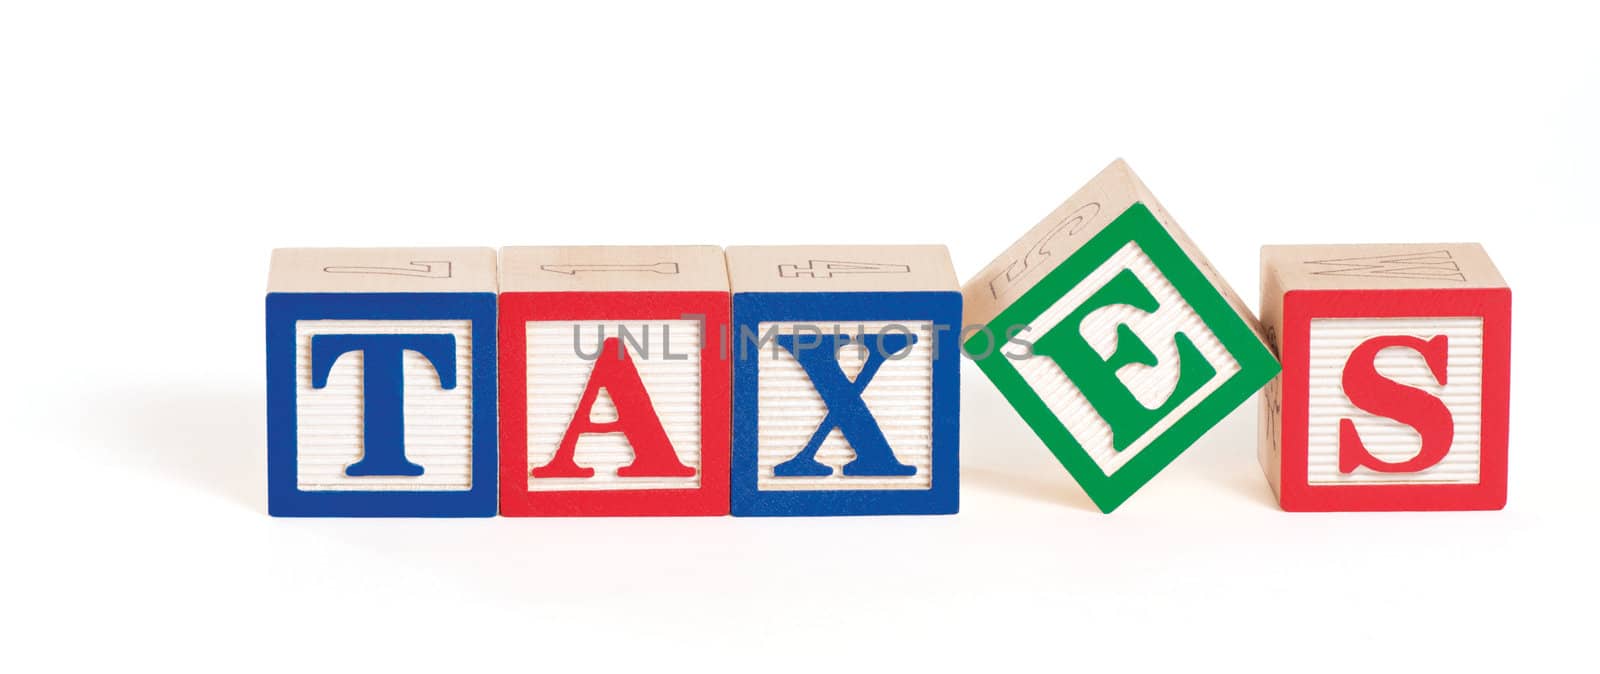 Alphabet blocks arranged to spell the word, "taxes" with the letter 'E' askew. Isolated on white with clipping path.